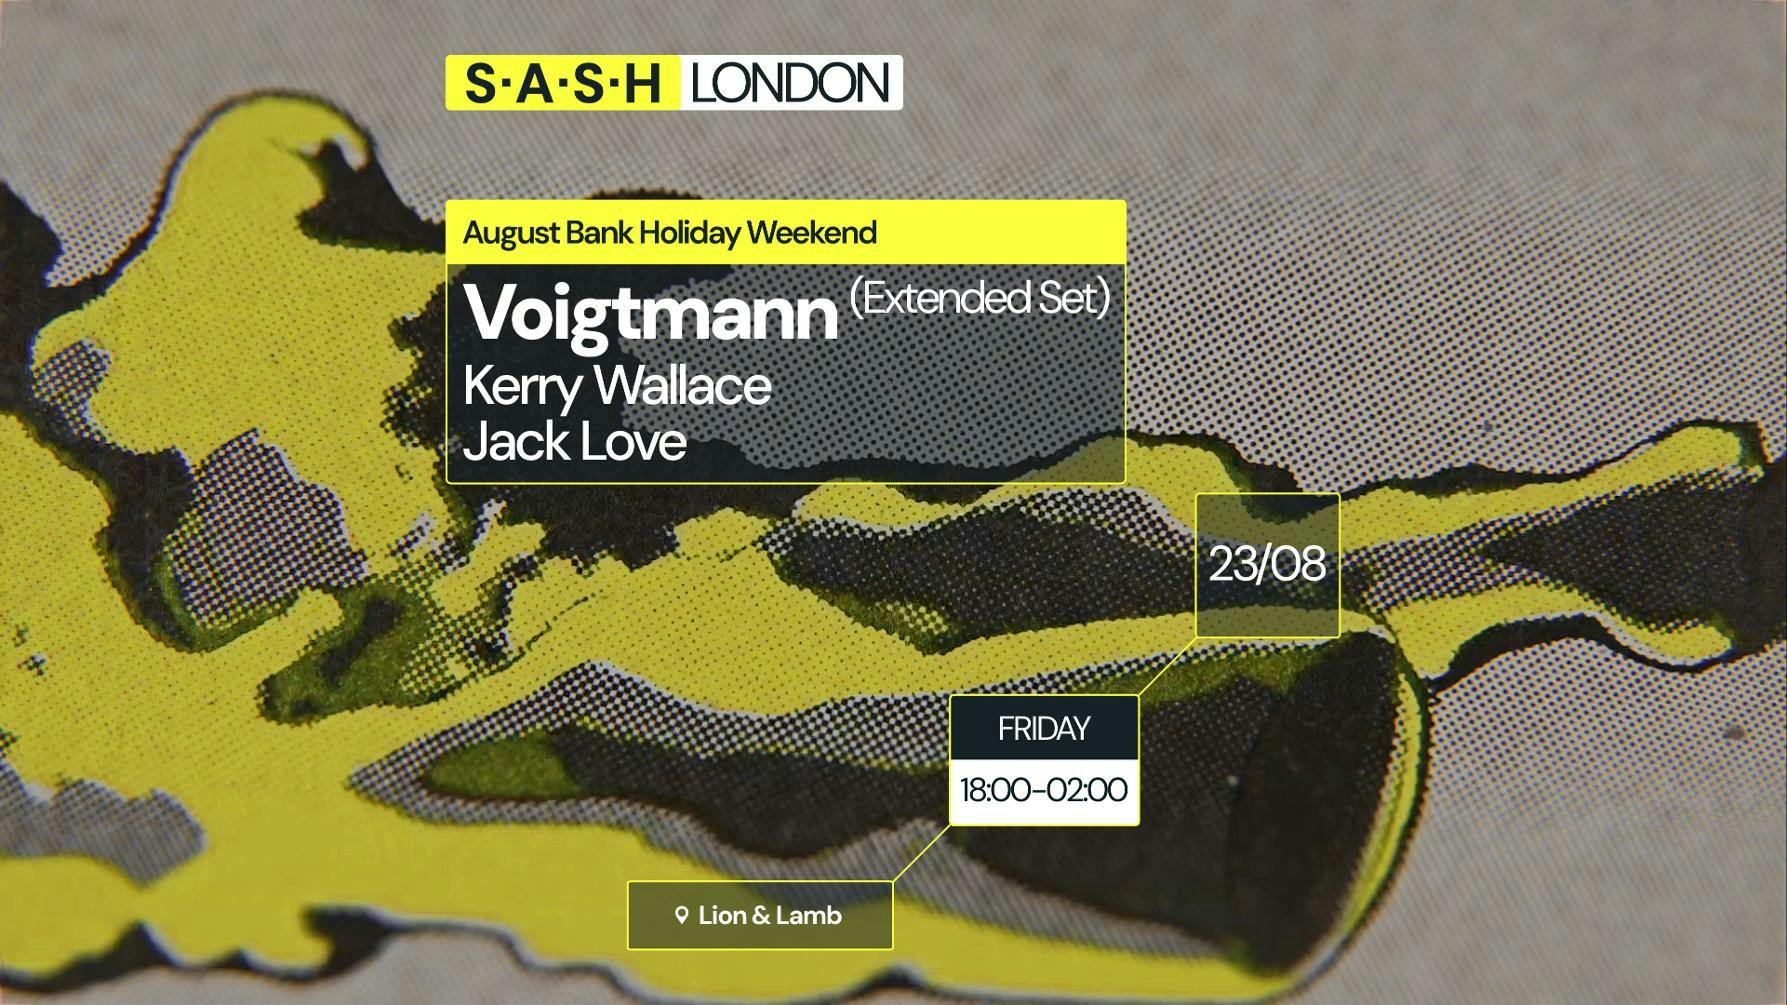 ★ S.A.S.H London ★ Lion & Lamb with Voigtmann ★ August Bank Holiday ★